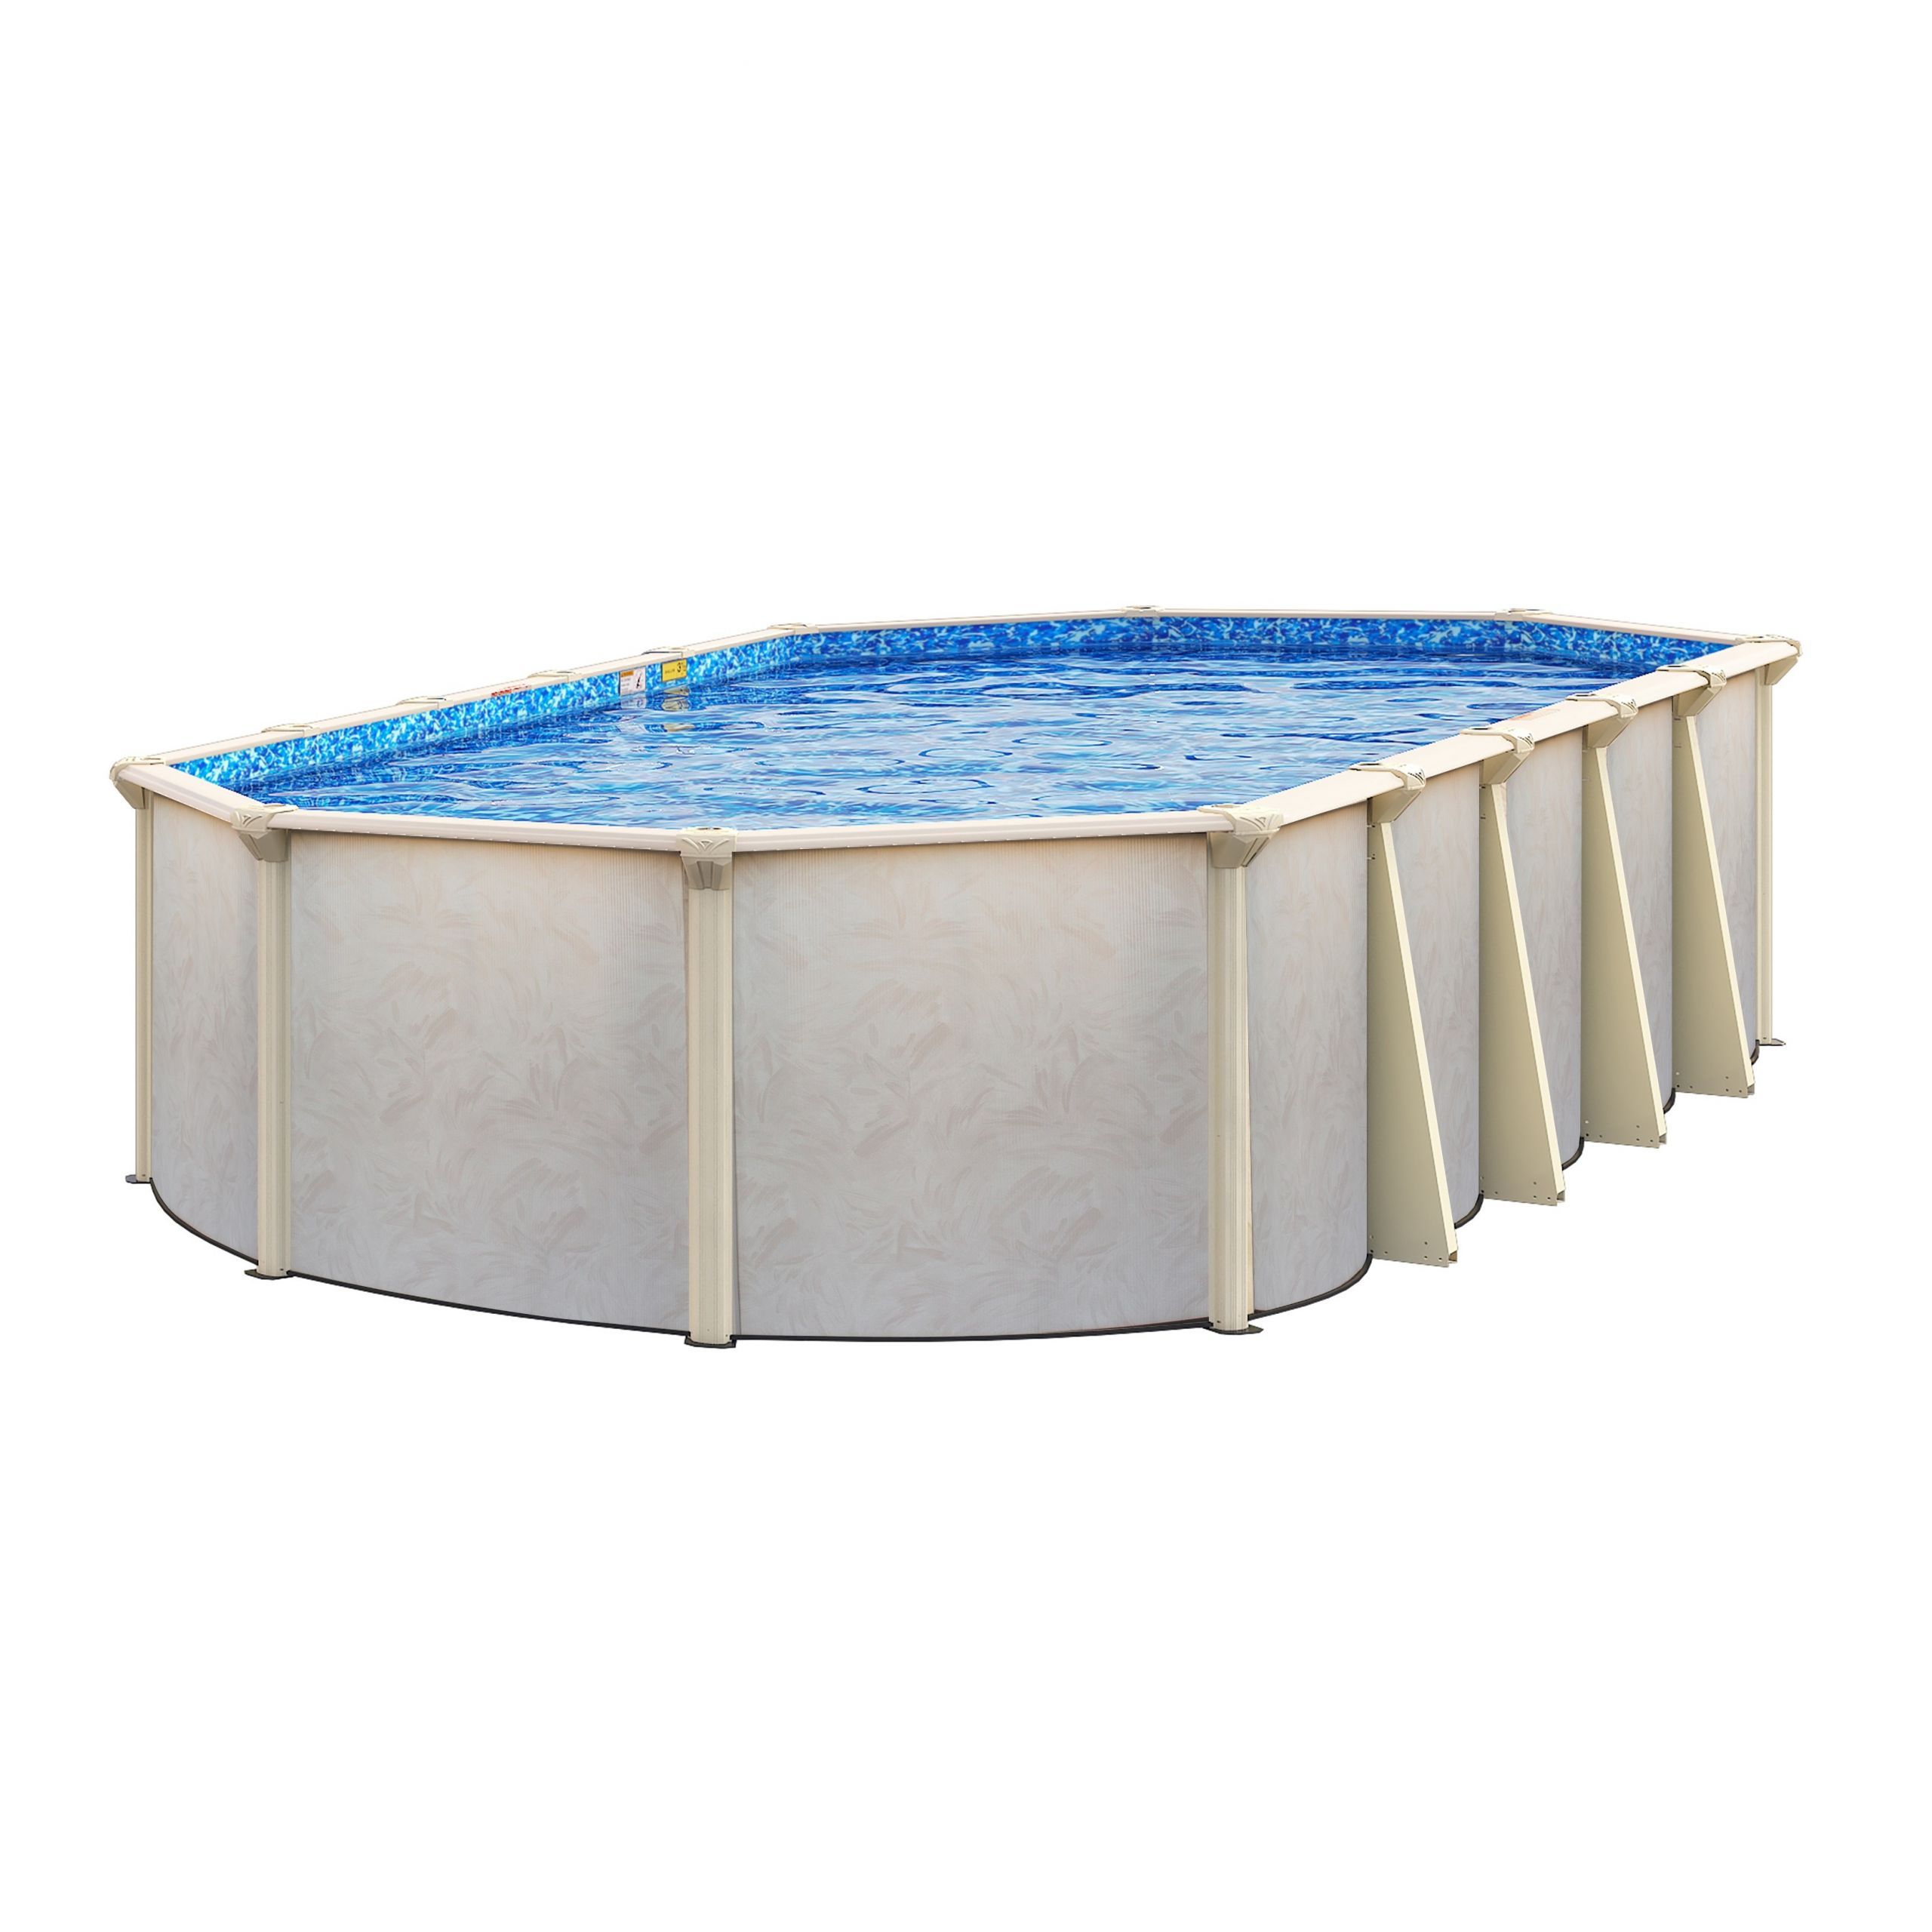 Walmart Above Ground Pool
 Embassy Pools Grand Haven Oval Ground Pool Package